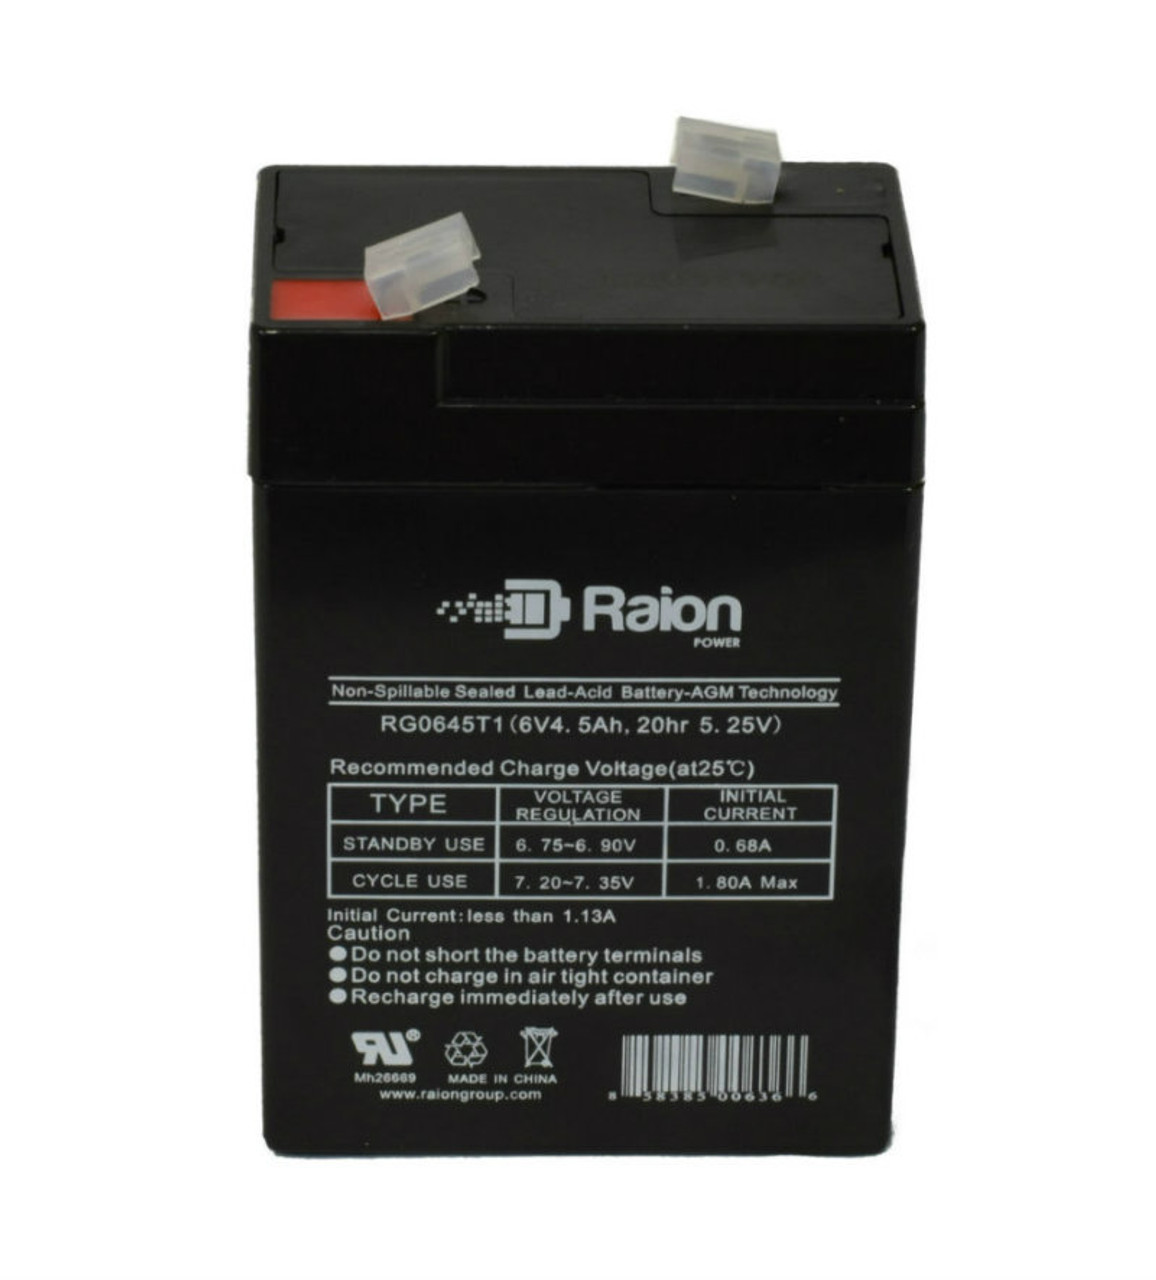 Raion Power RG0645T1 Replacement Battery Cartridge for MHB MS4.5-6